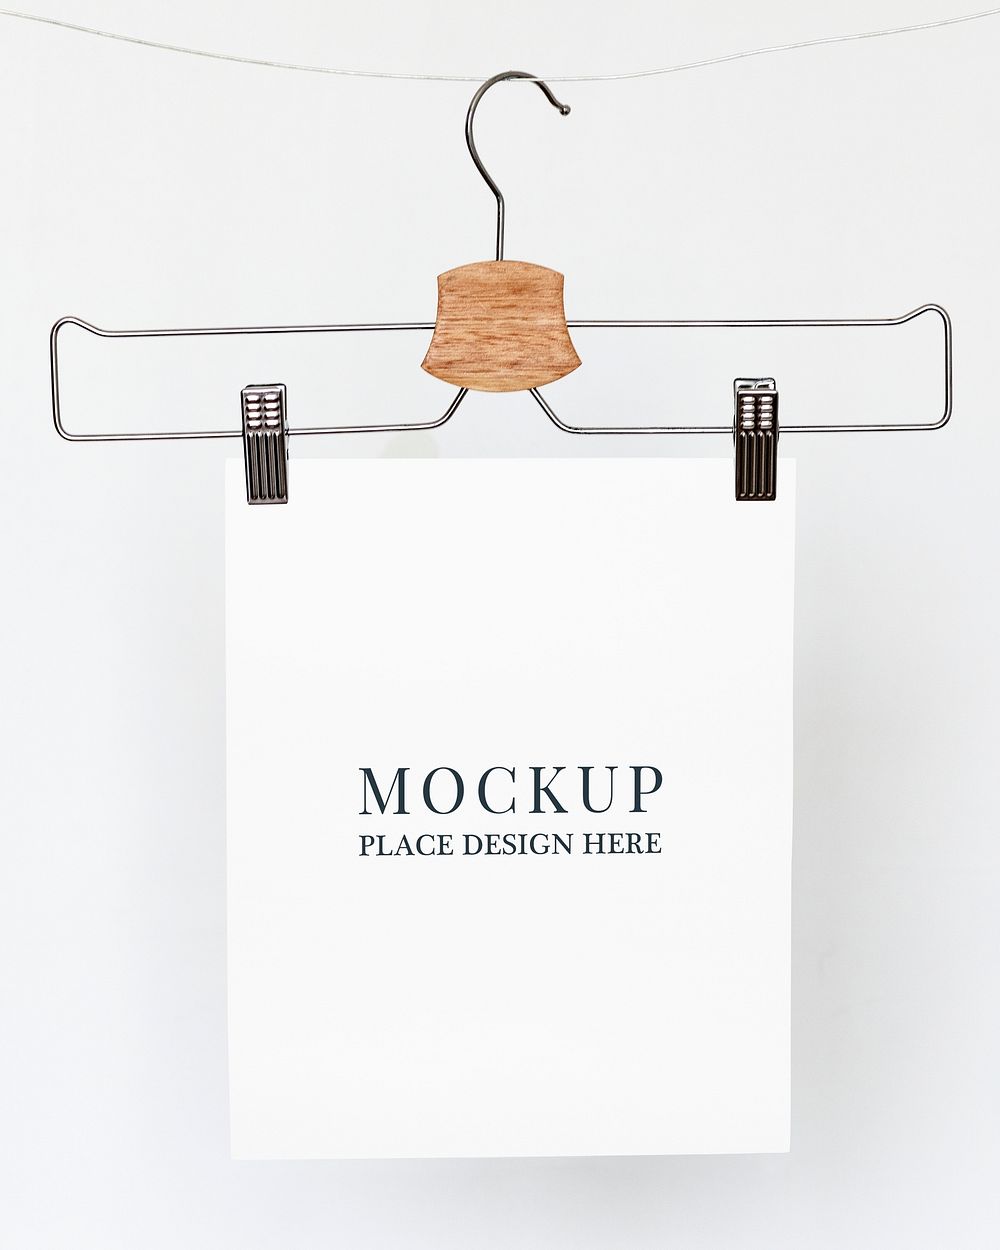 Papers mockup psd hanging from a cloth hanger 